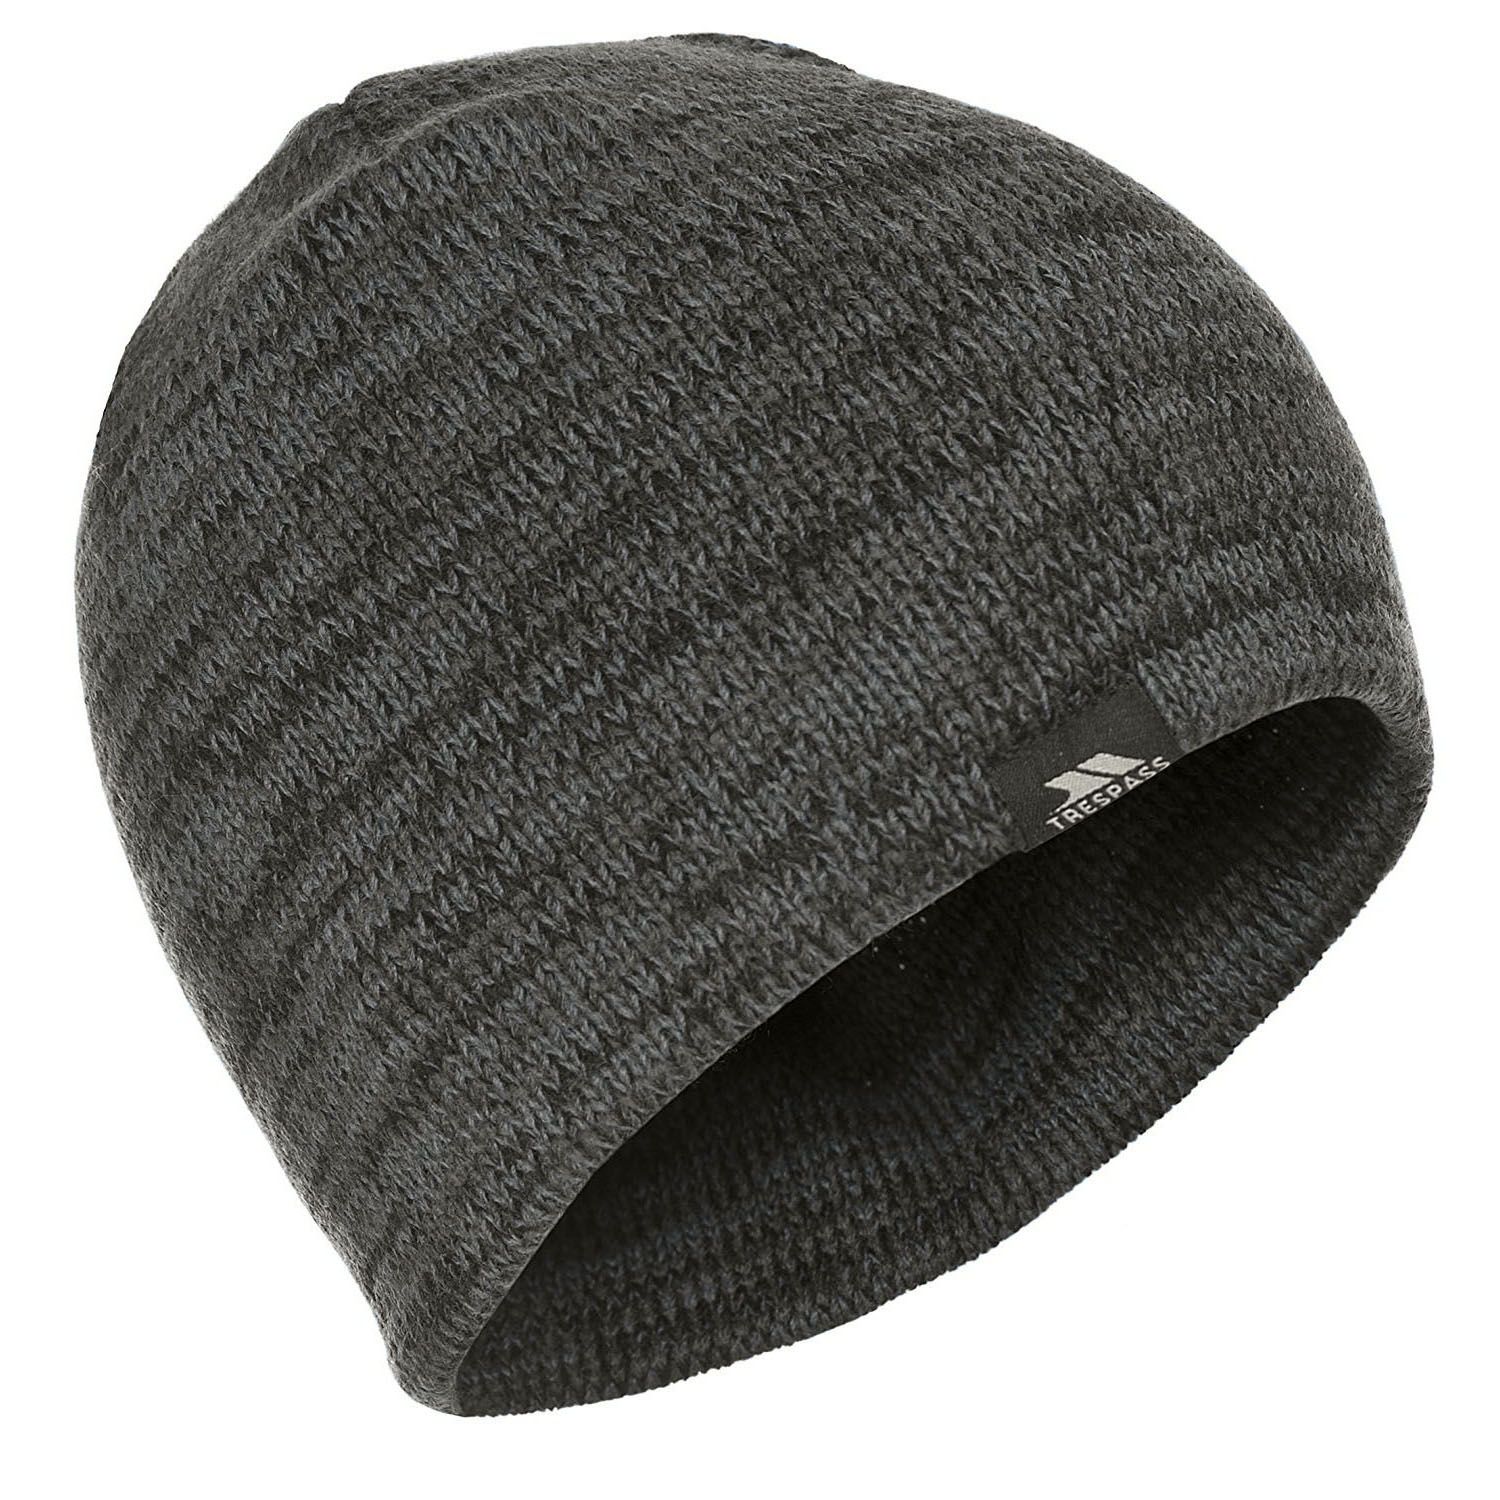 Mens Marl Beanie. Woven Label. Outer 100% Acrylic. Double Walled.